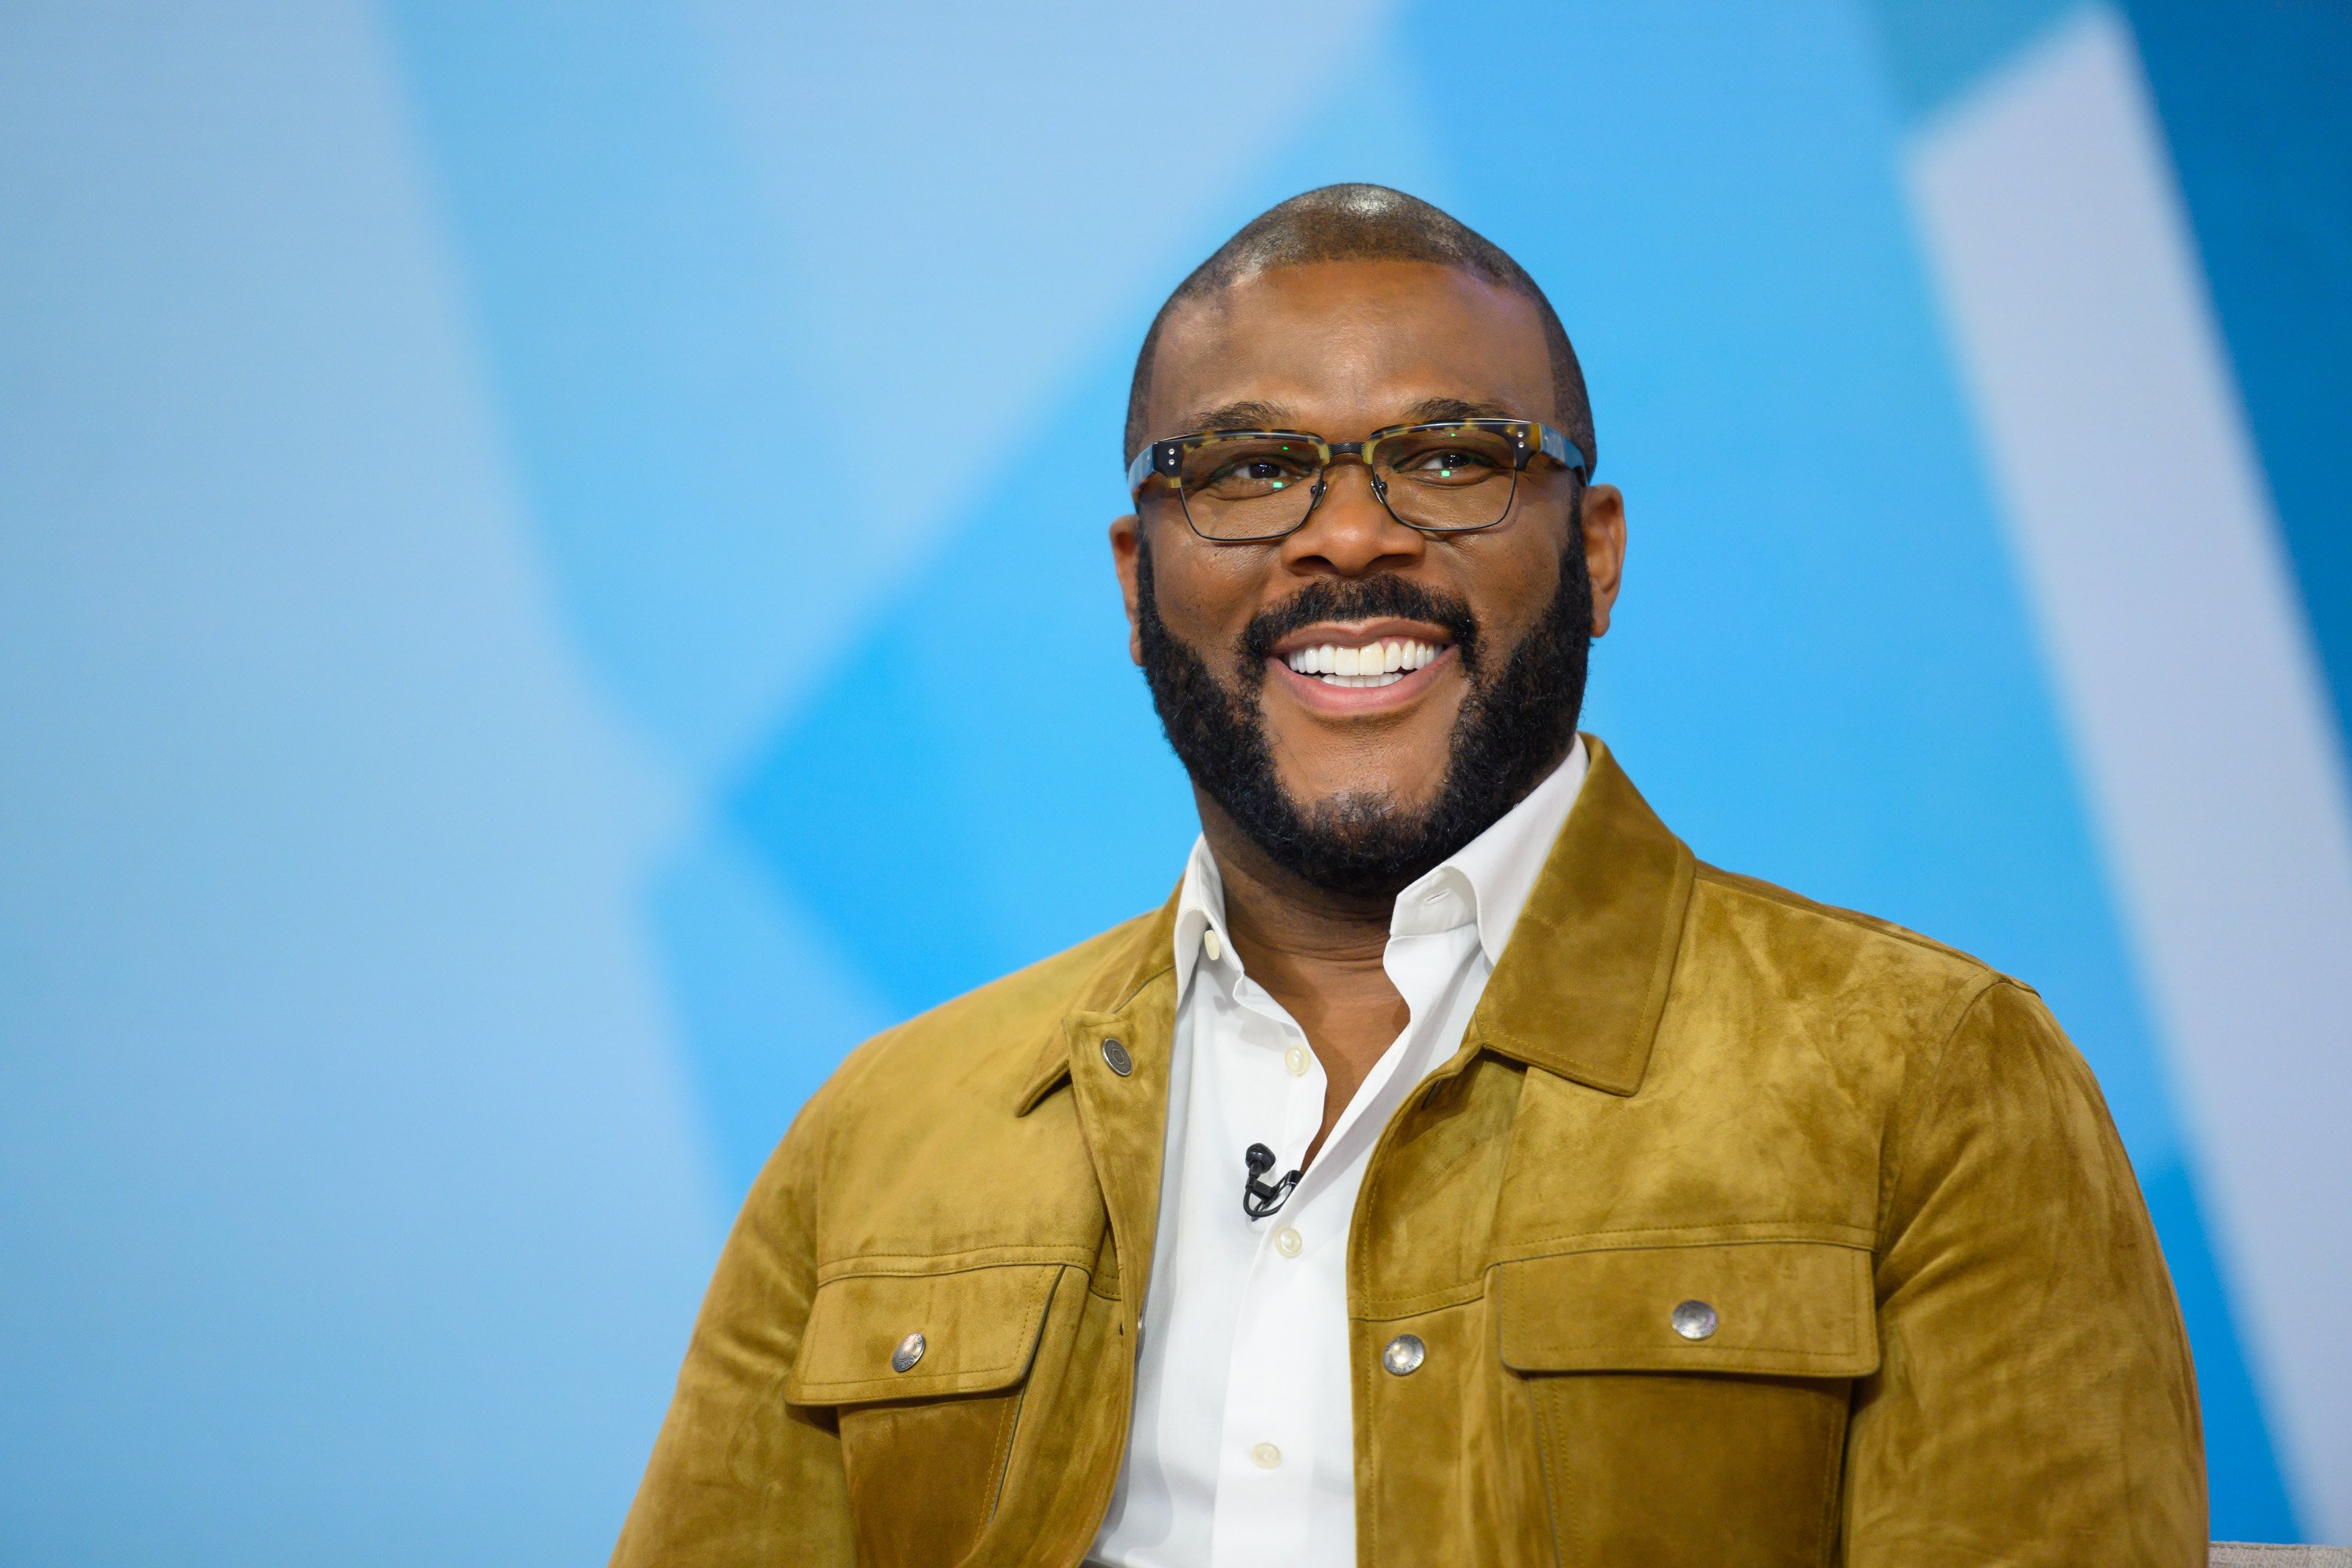 Tyler Perry visits the "Today" show on January 13, 2020. | Photo: Getty Images